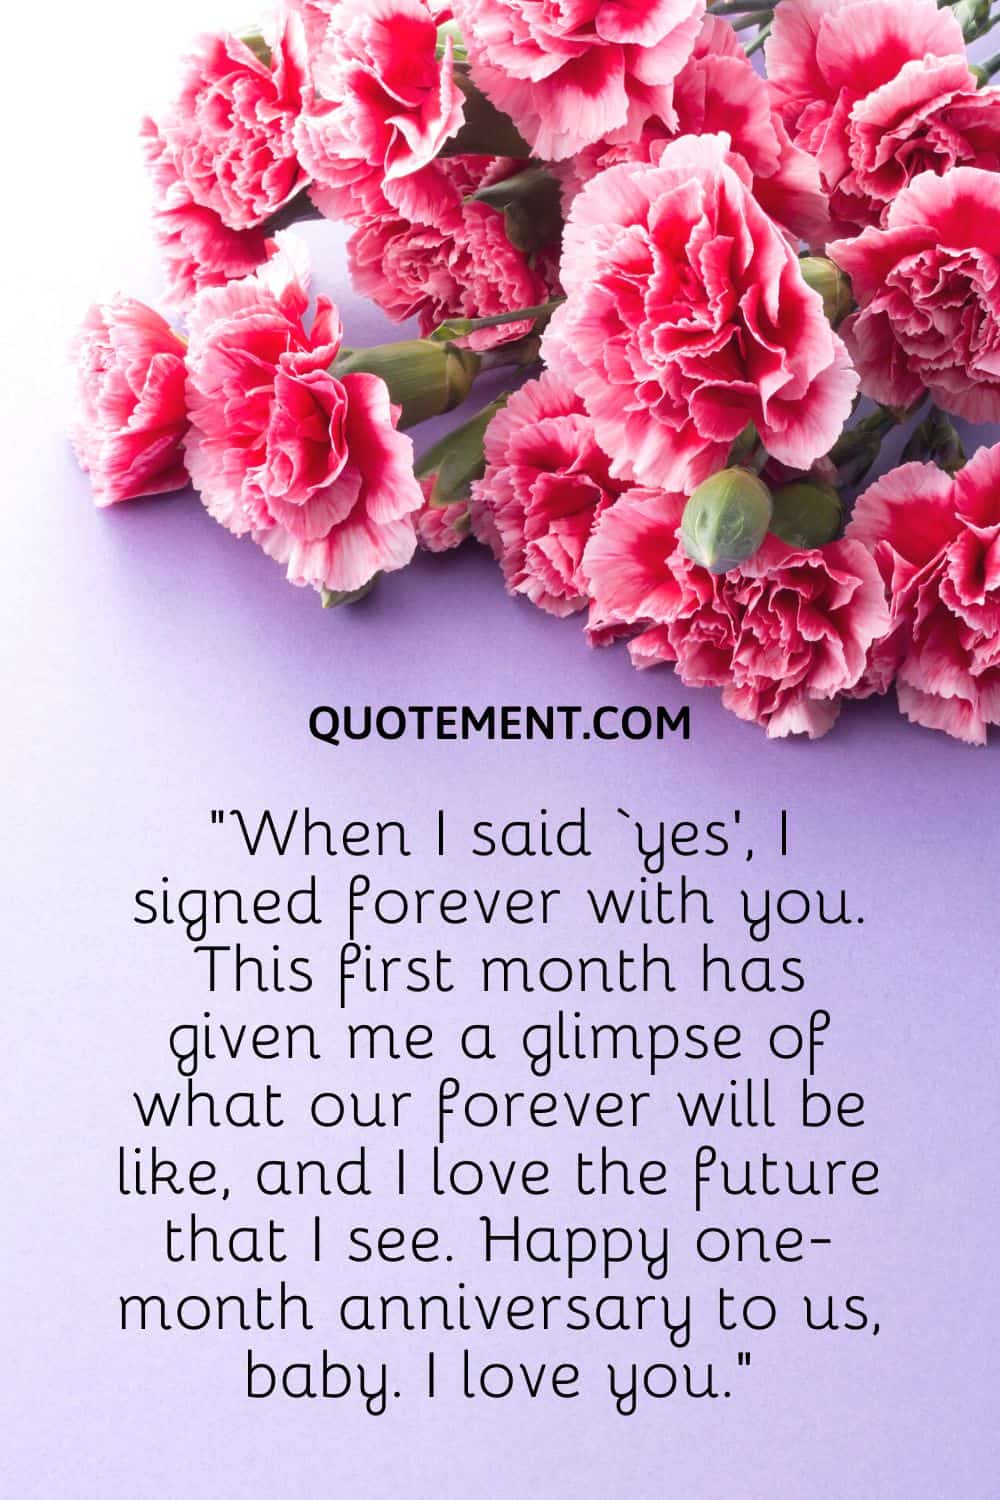 When I said ‘yes’, I signed forever with you